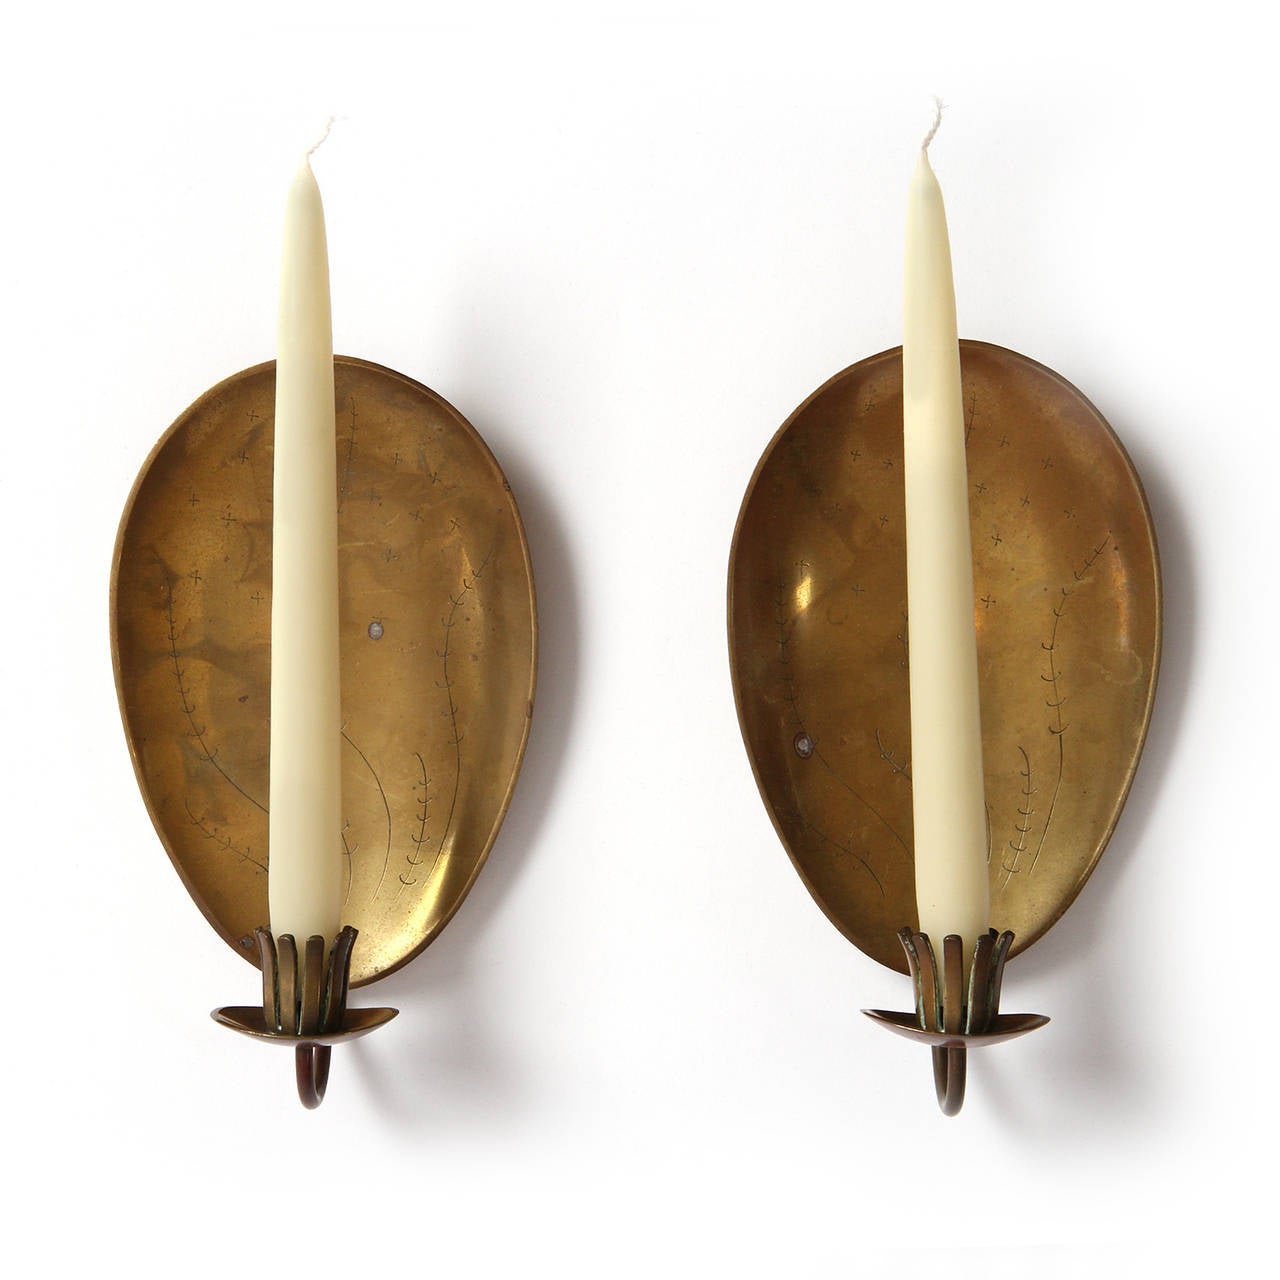 A beautiful pair of hand crafted patinated bronze candle sconces having flora engraved oval shields and organic slotted petal form candle holders.